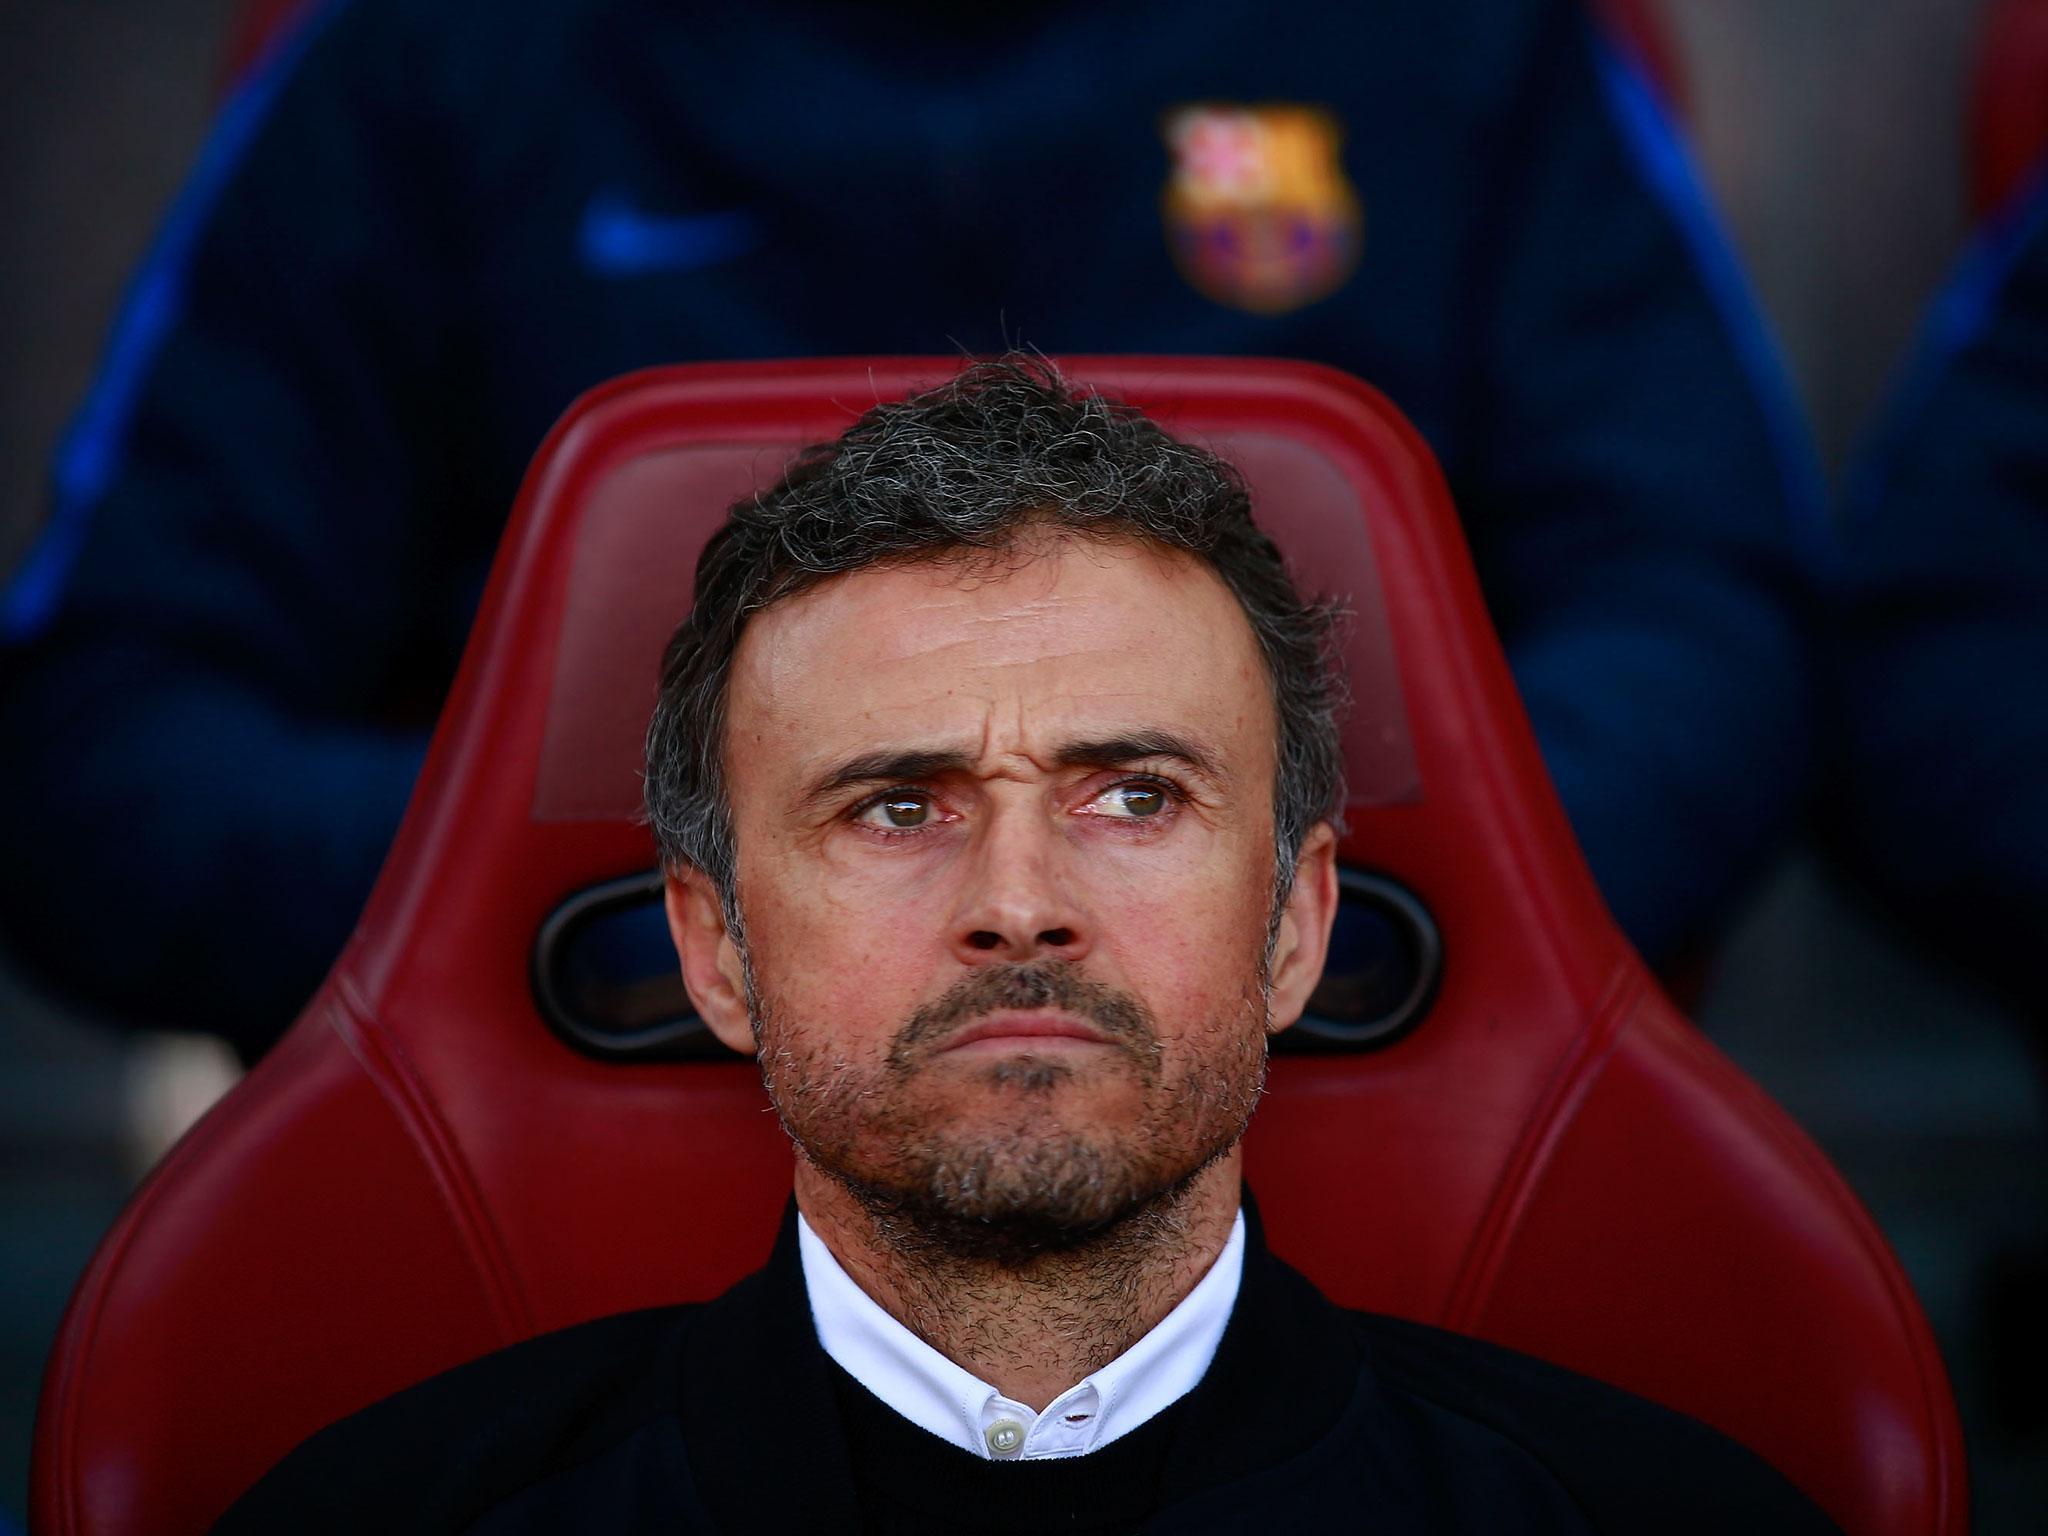 Tired' Luis Enrique served Barcelona well, but departure won't fix